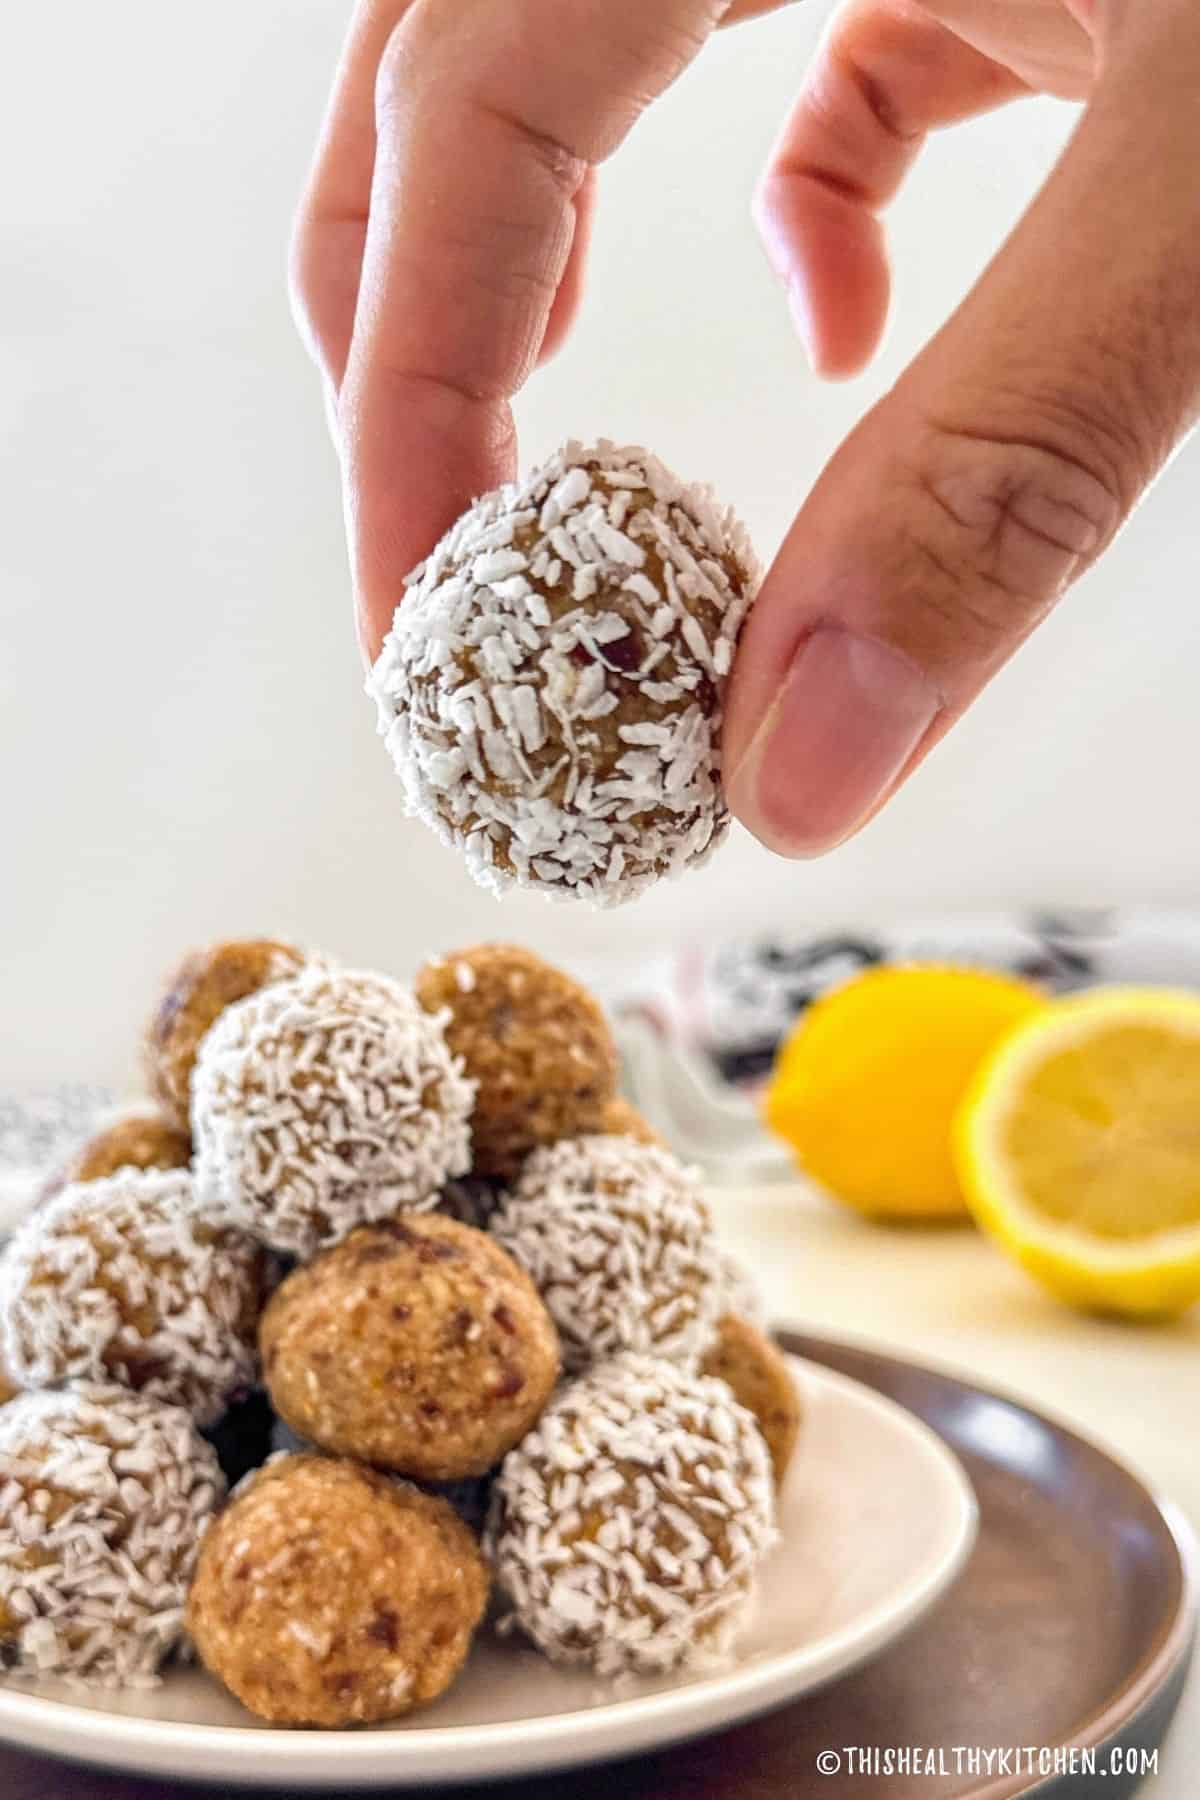 Hand holding up an energy ball with coconut around it and plate with more balls below.